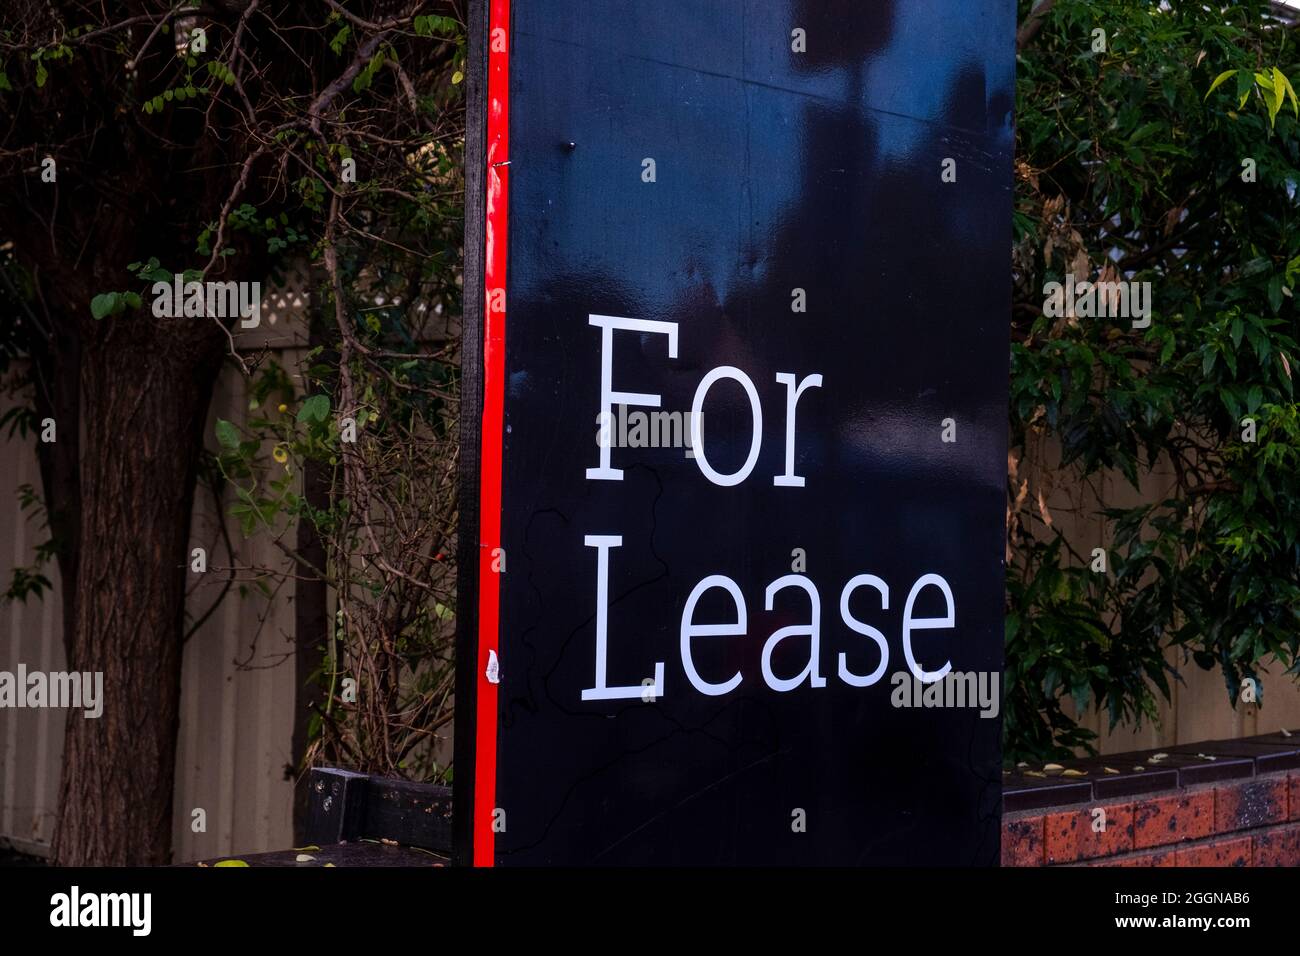 House for lease sign in Collingwood, Melbourne, Victoria, Australia Stock Photo